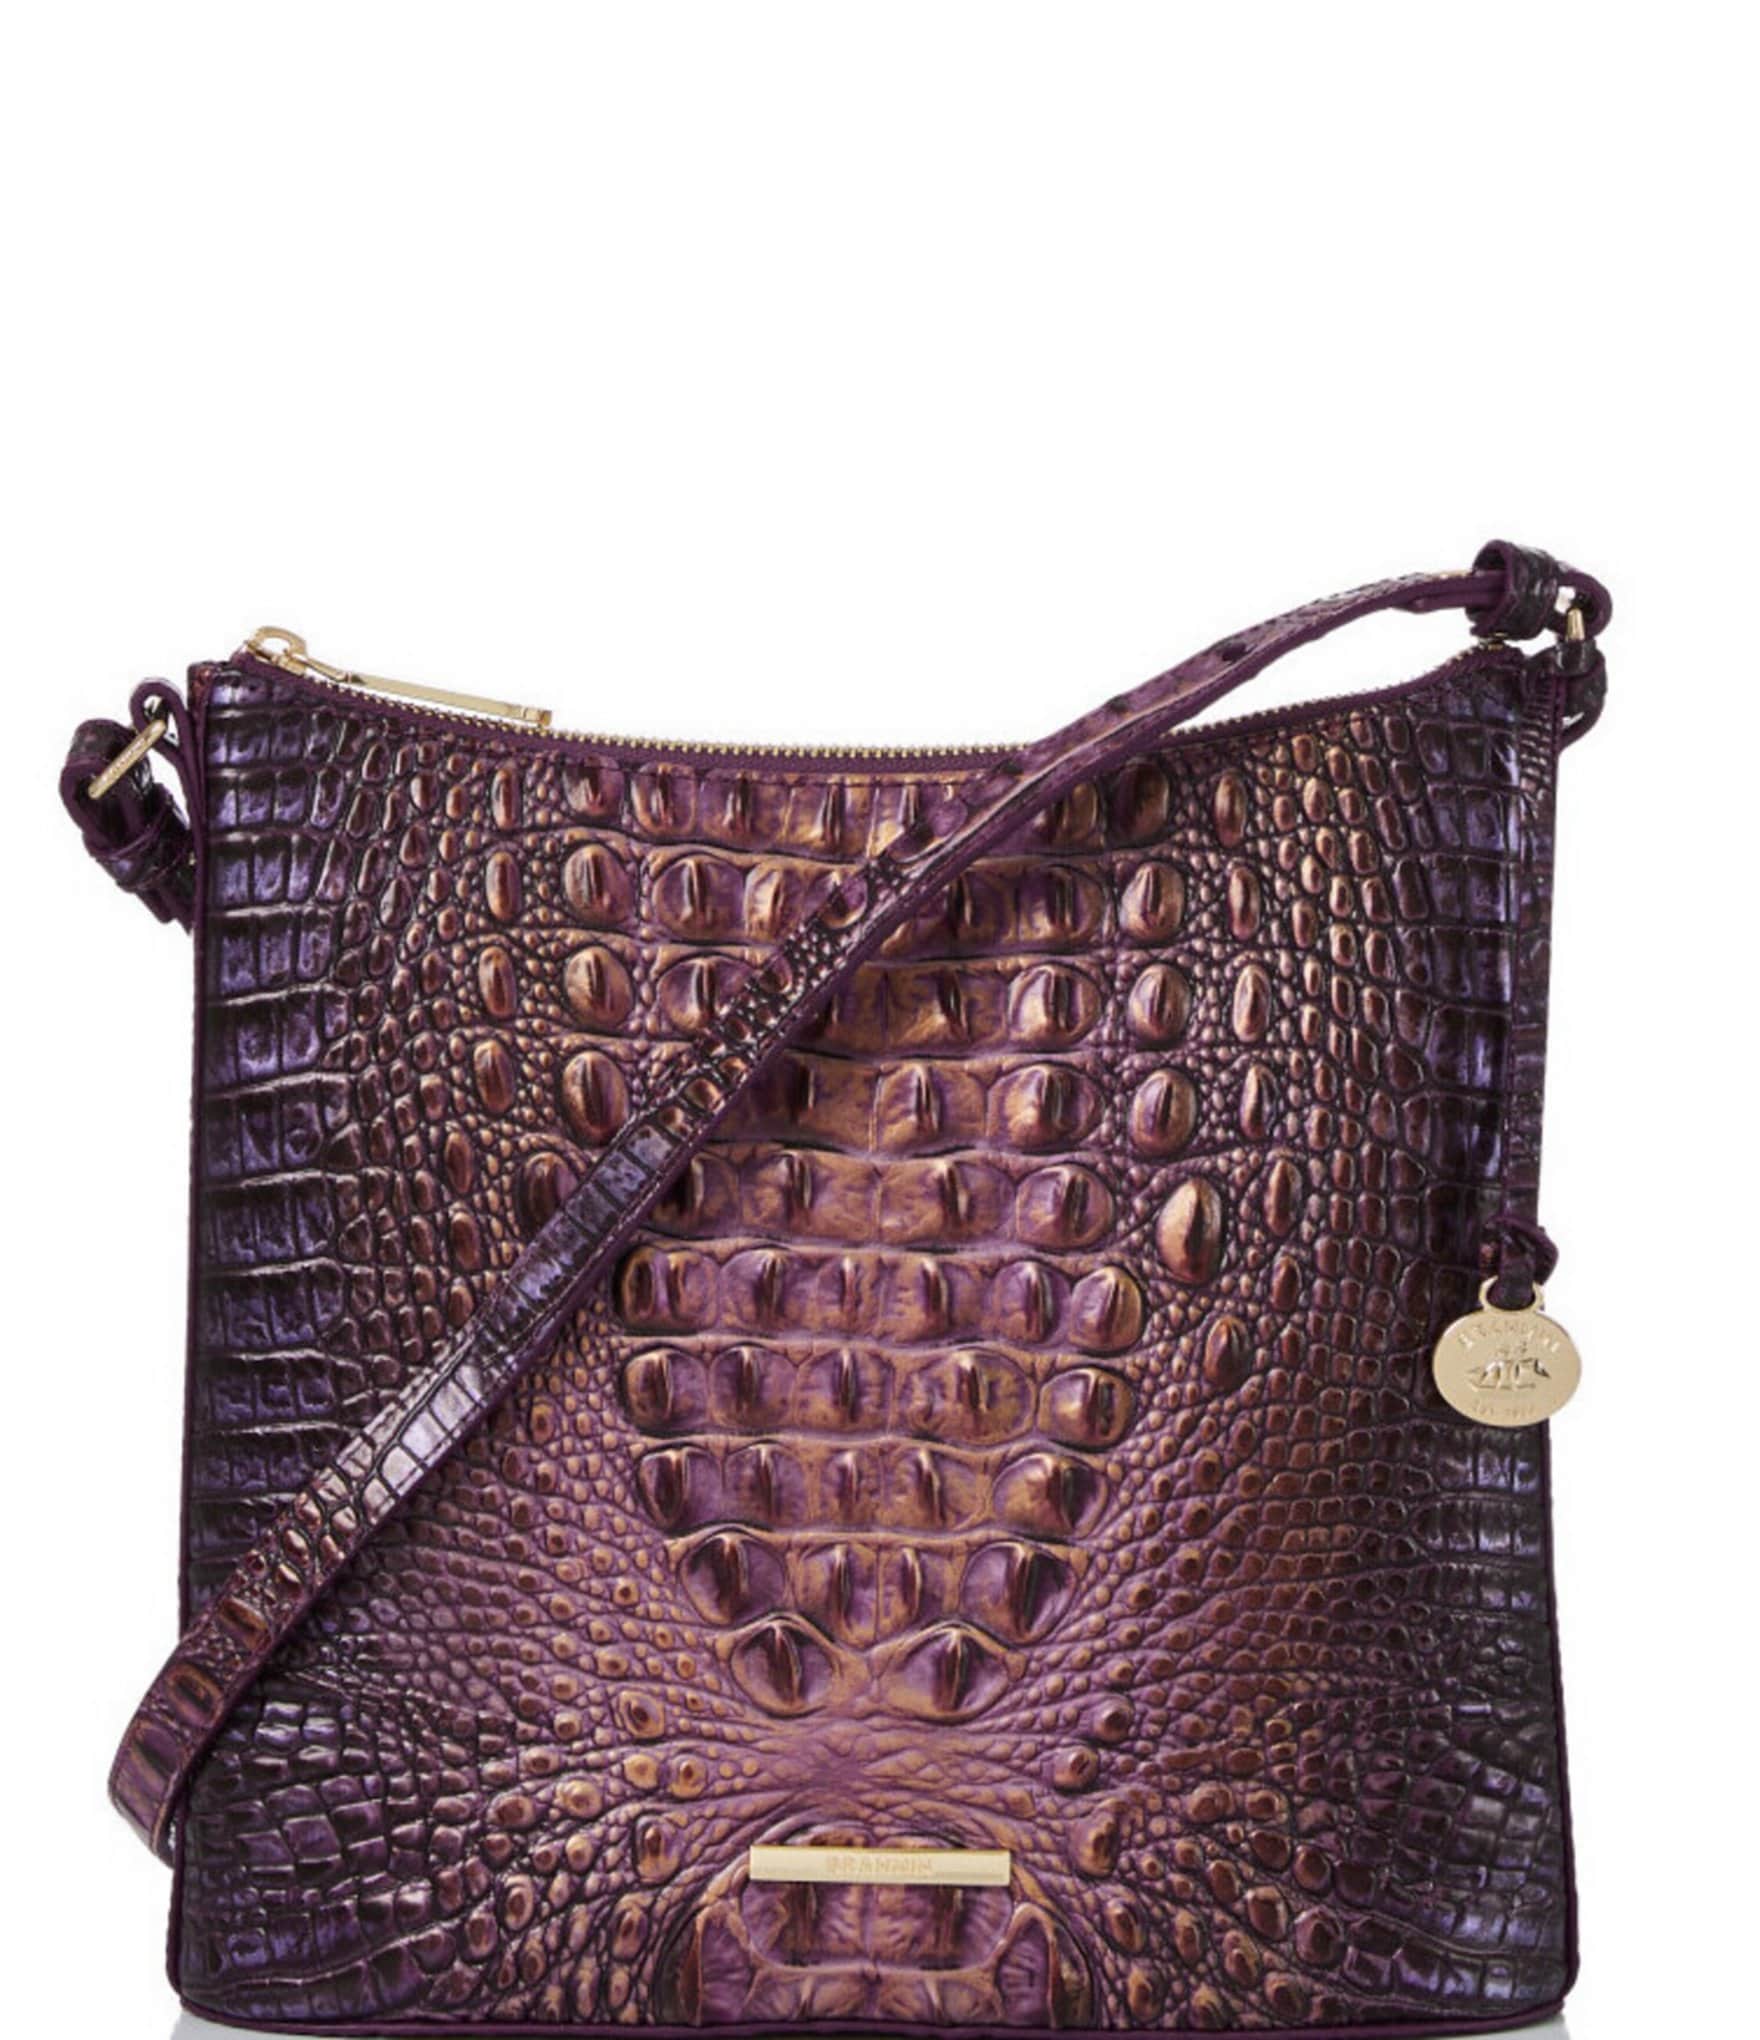 Brahmin bags… a preview of what will be dropping next week. This